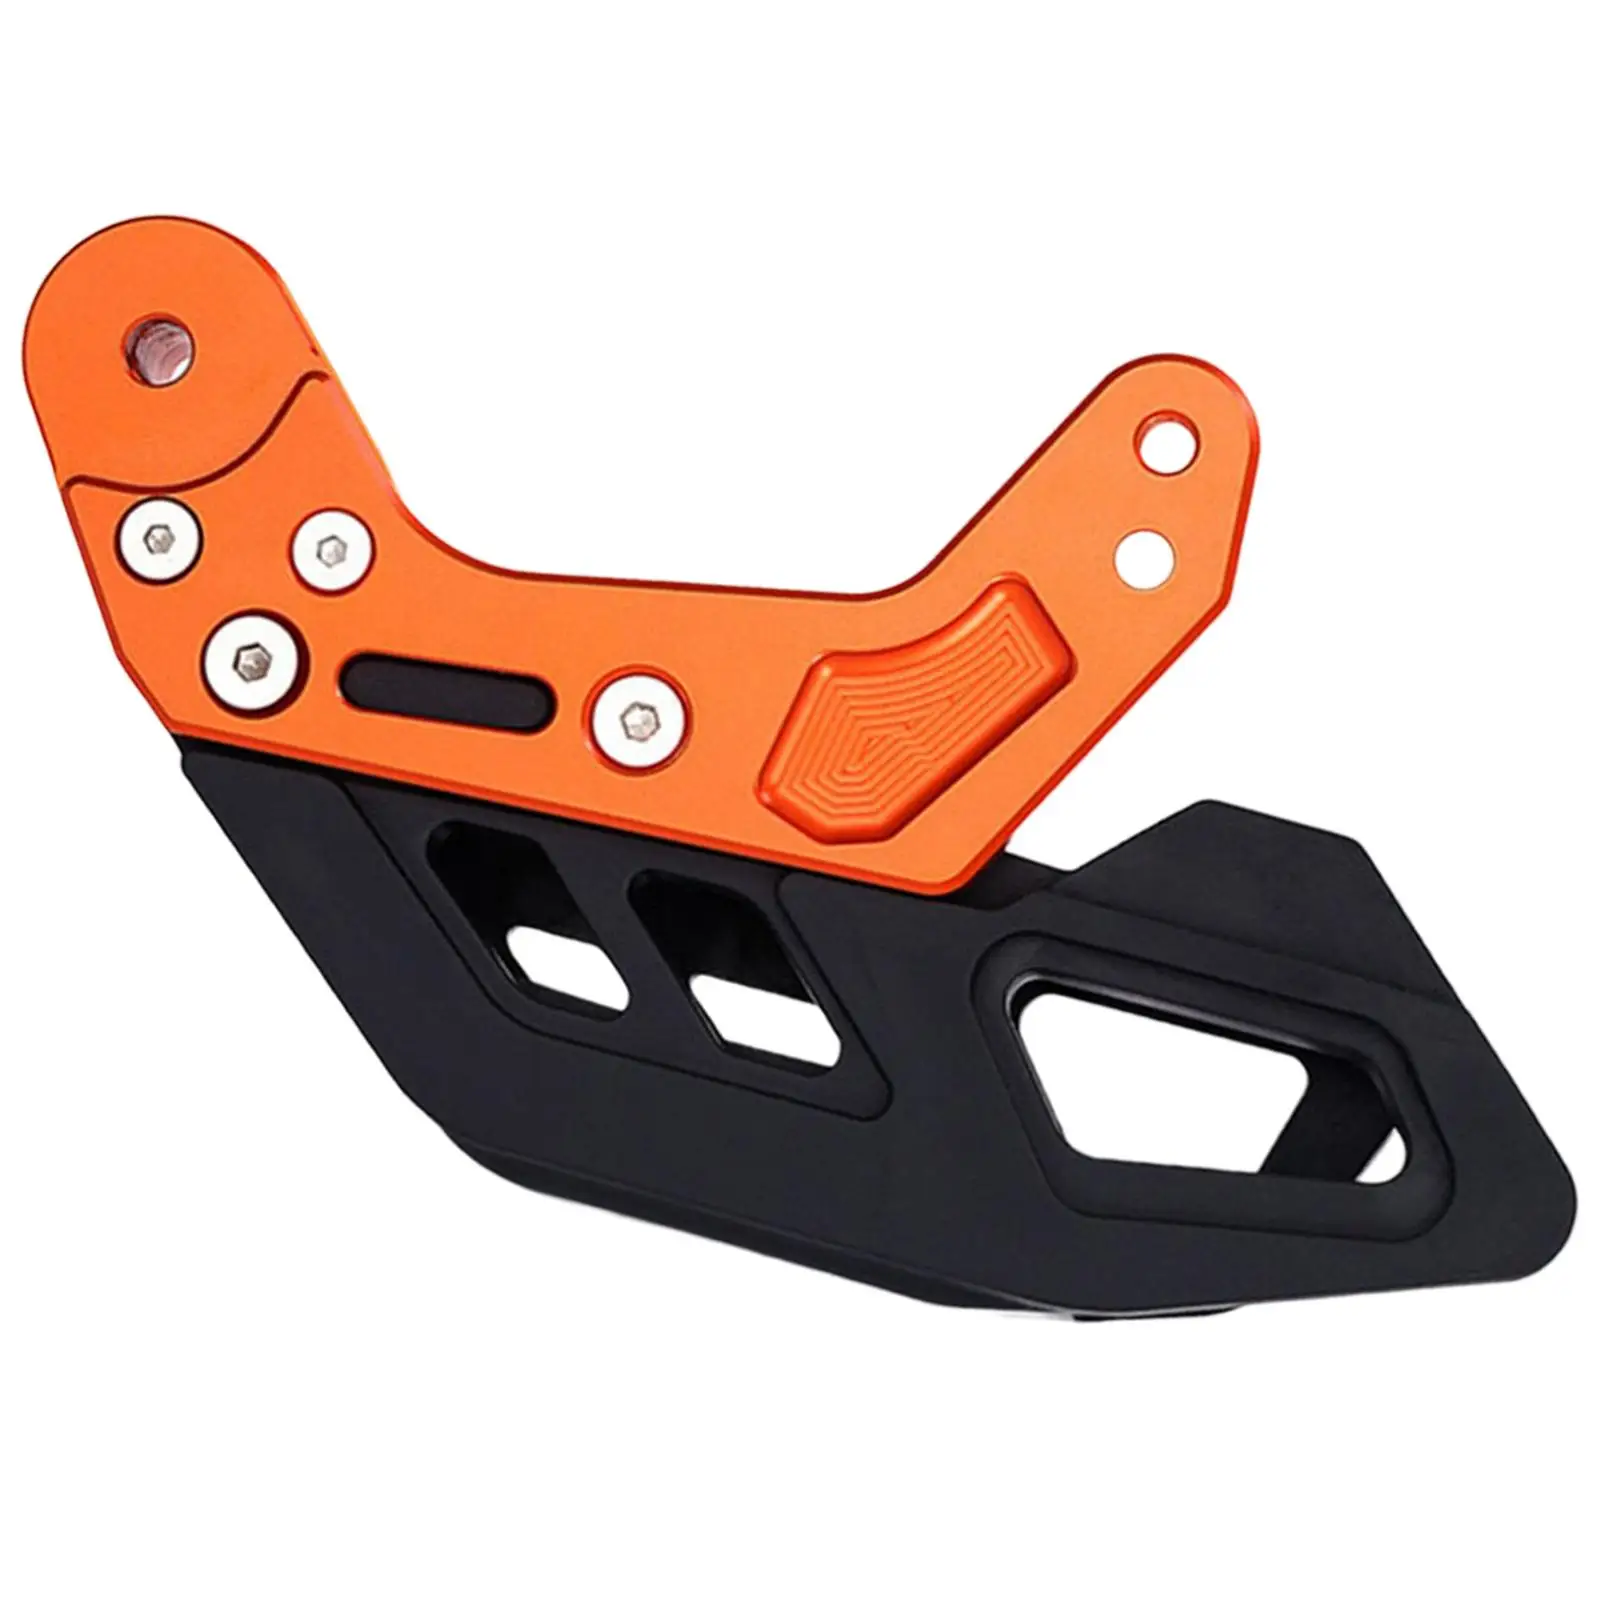 Motorcycle Chain Guide Guard Fits for 125 200 250 300 350 400 500 Exc ESX Sxf XC Xcww